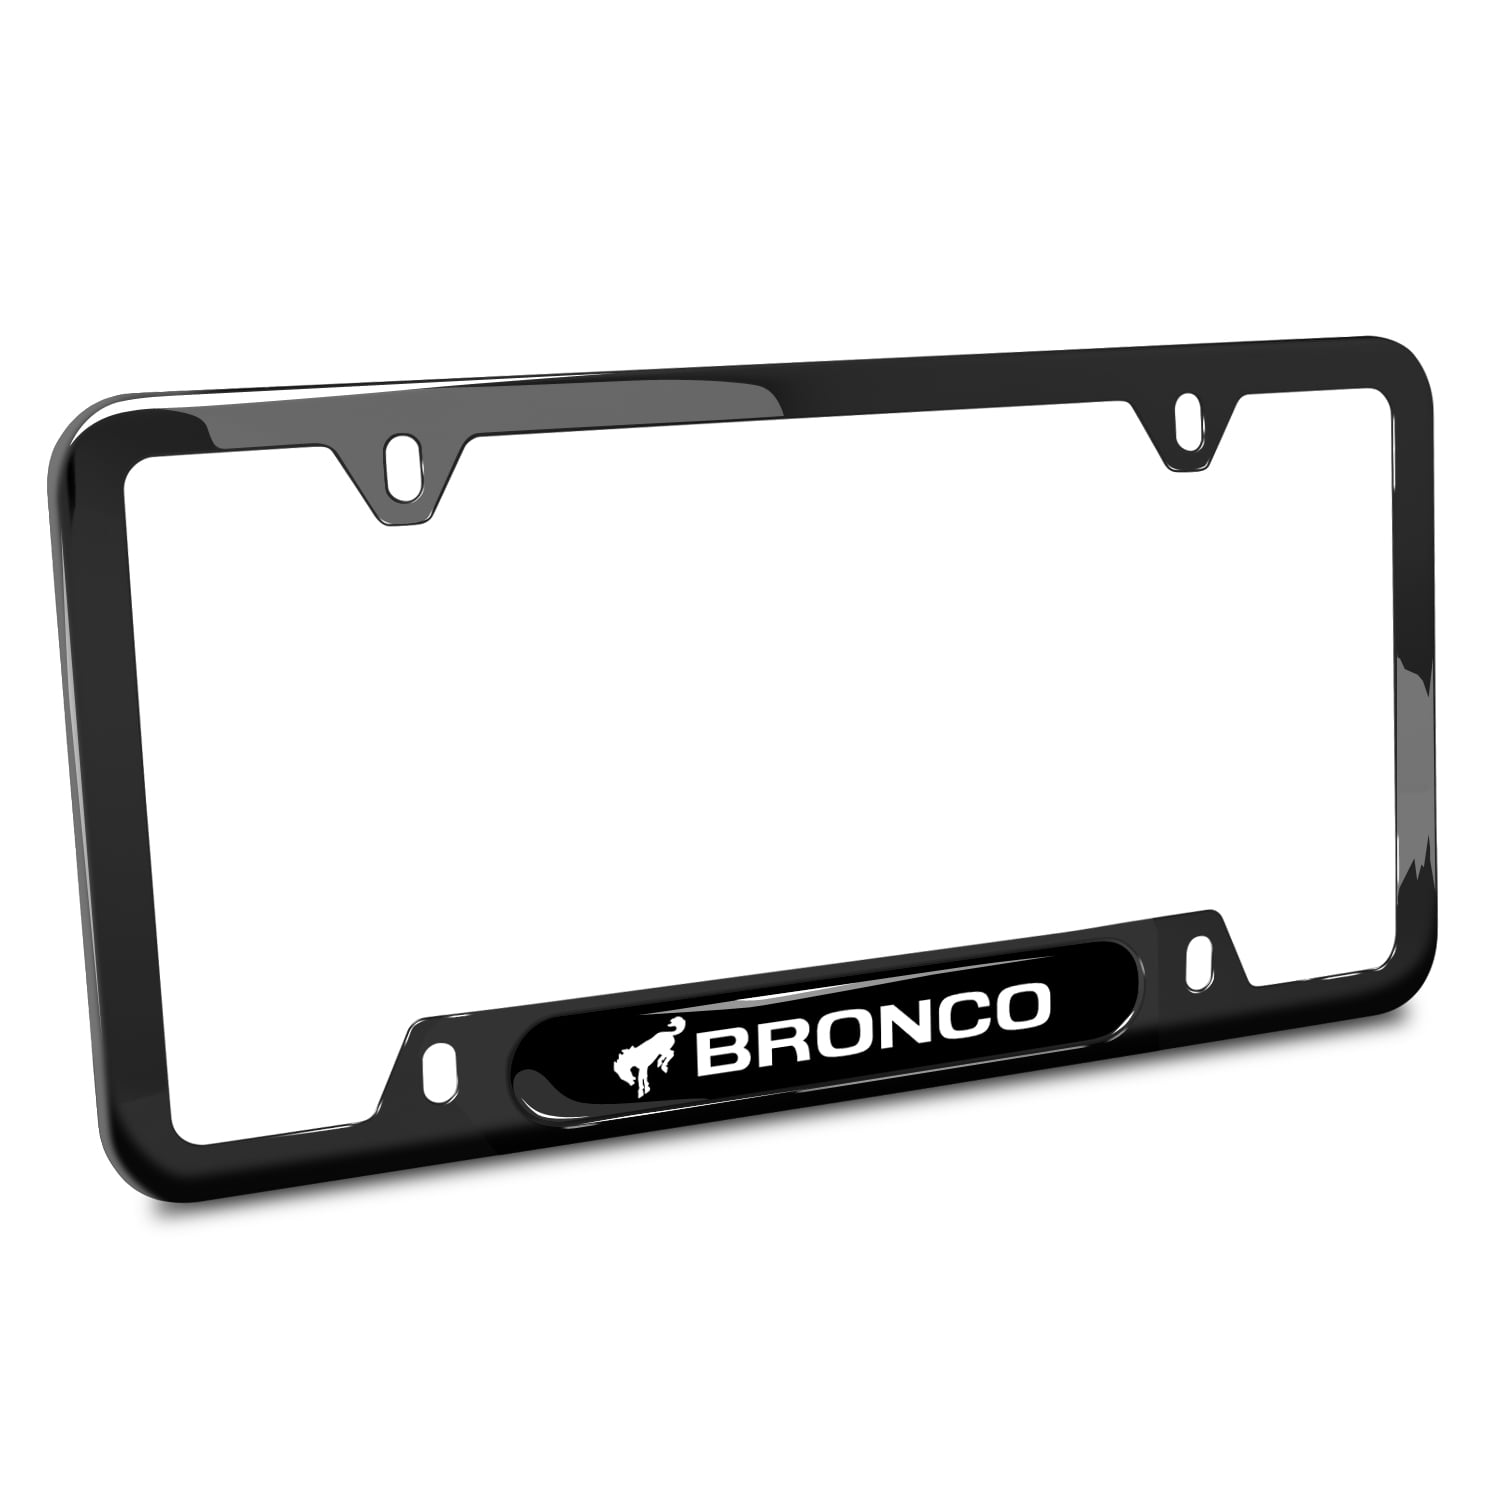 Motorcycle Classic Black High Quality License Plate Frame Metal Frame 